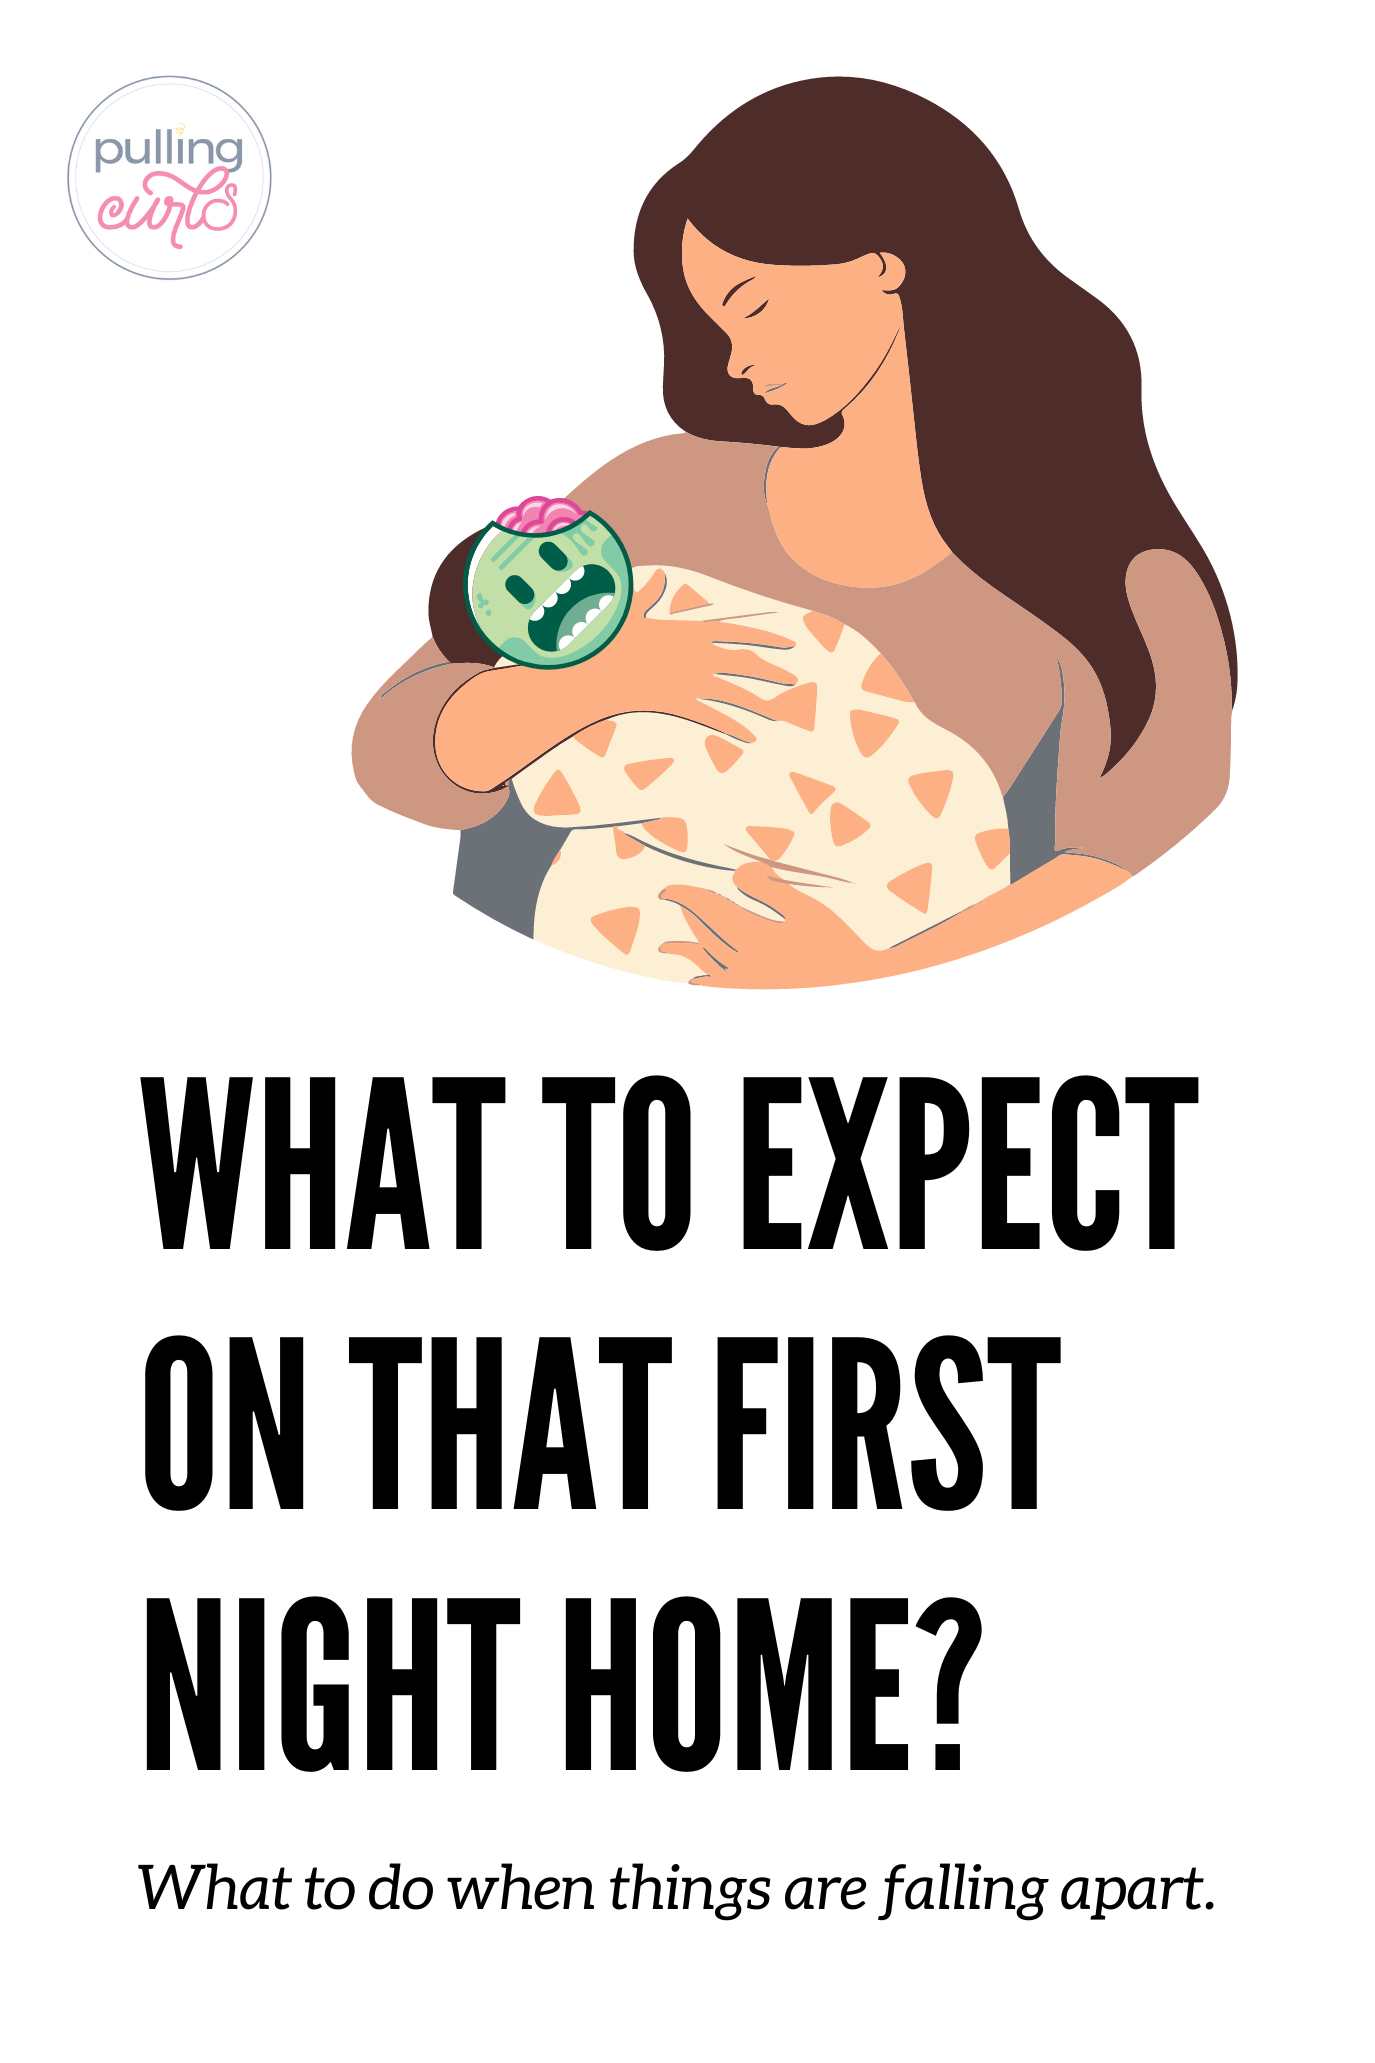 mom with zombie baby / what to expect on that first night home / what to do when things are falling apart. via @pullingcurls